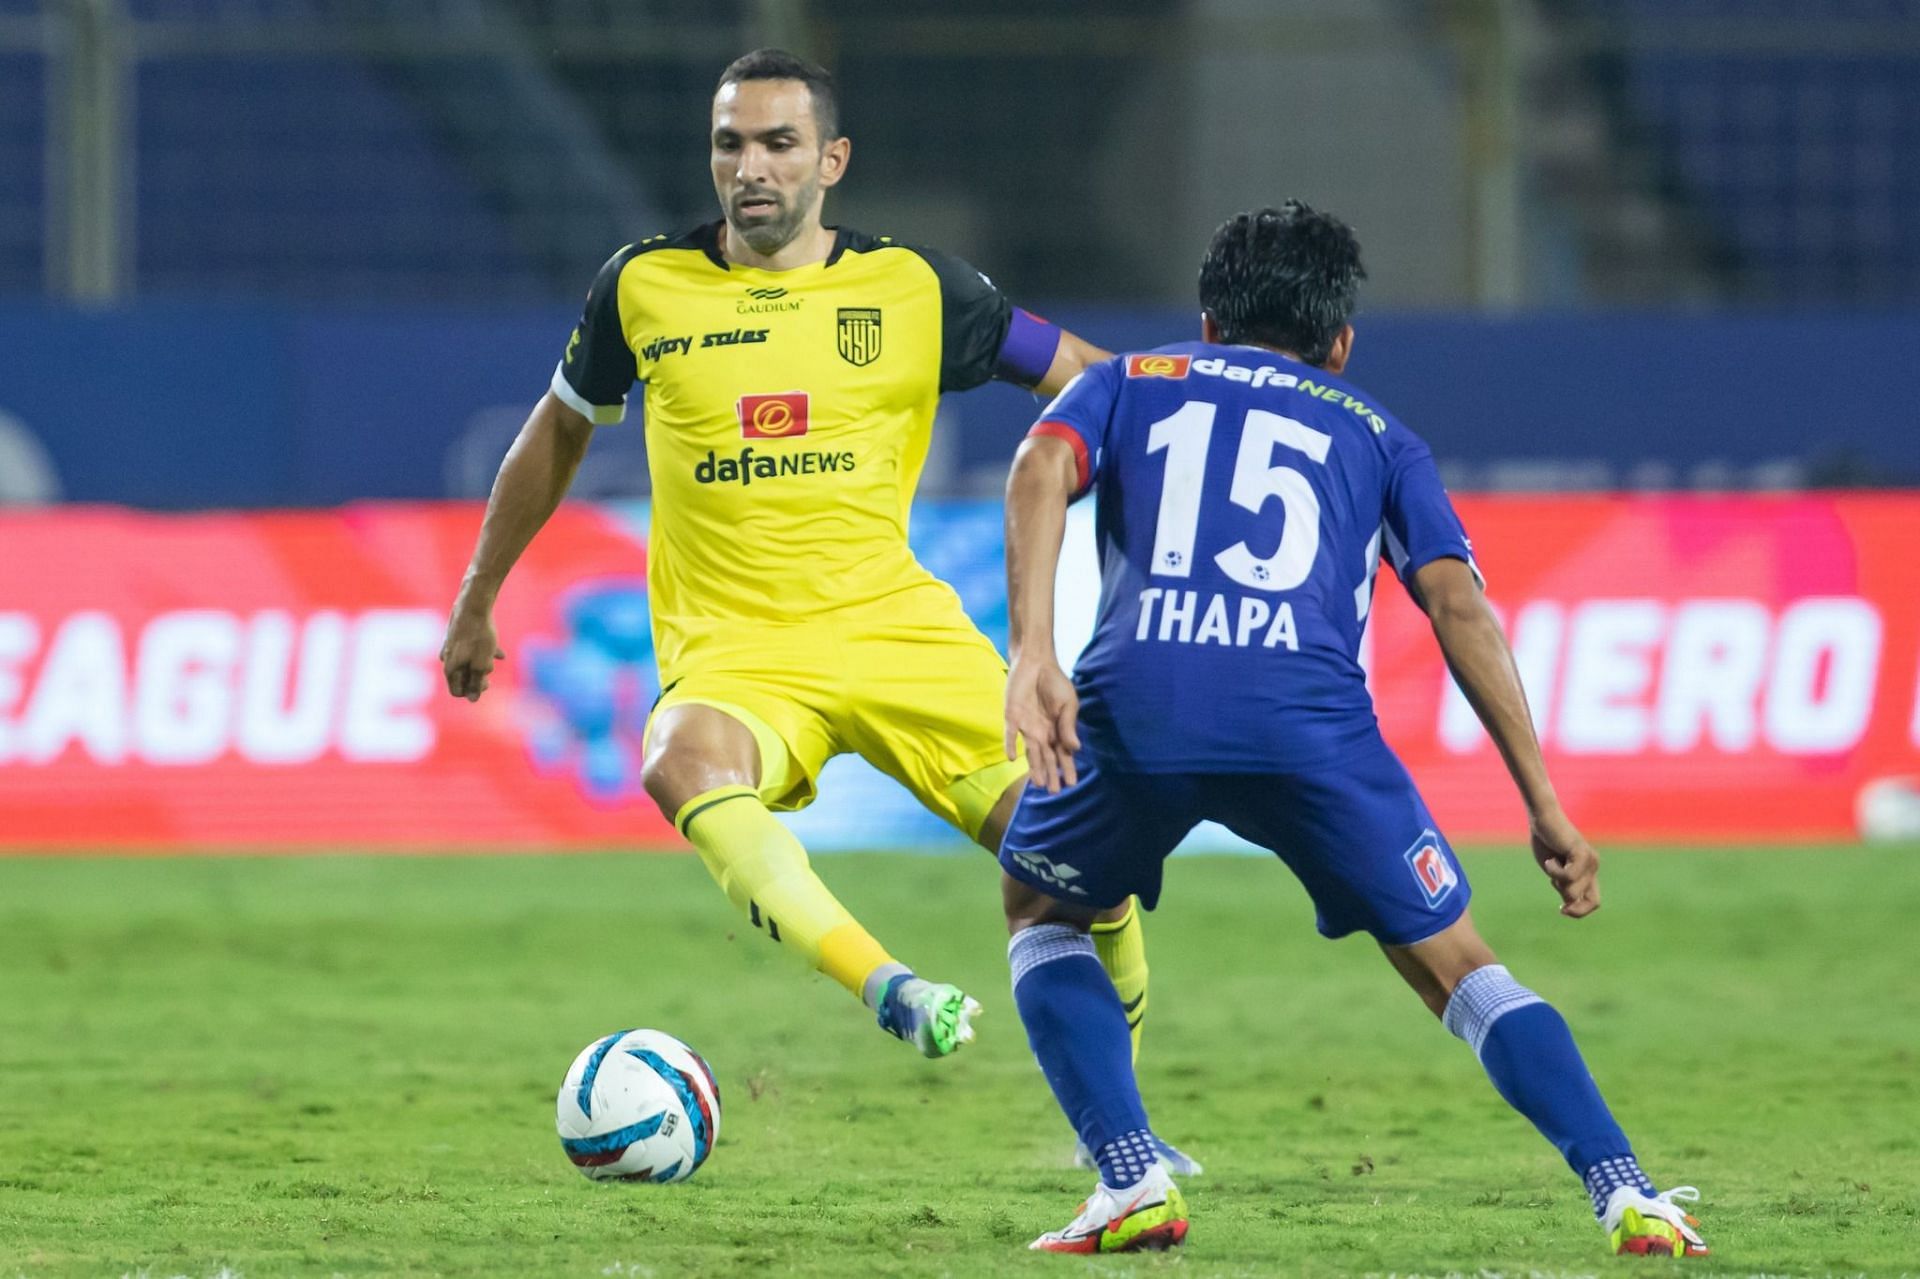 The match ended in a 1-1 draw. (Image courtesy: ISL social media)